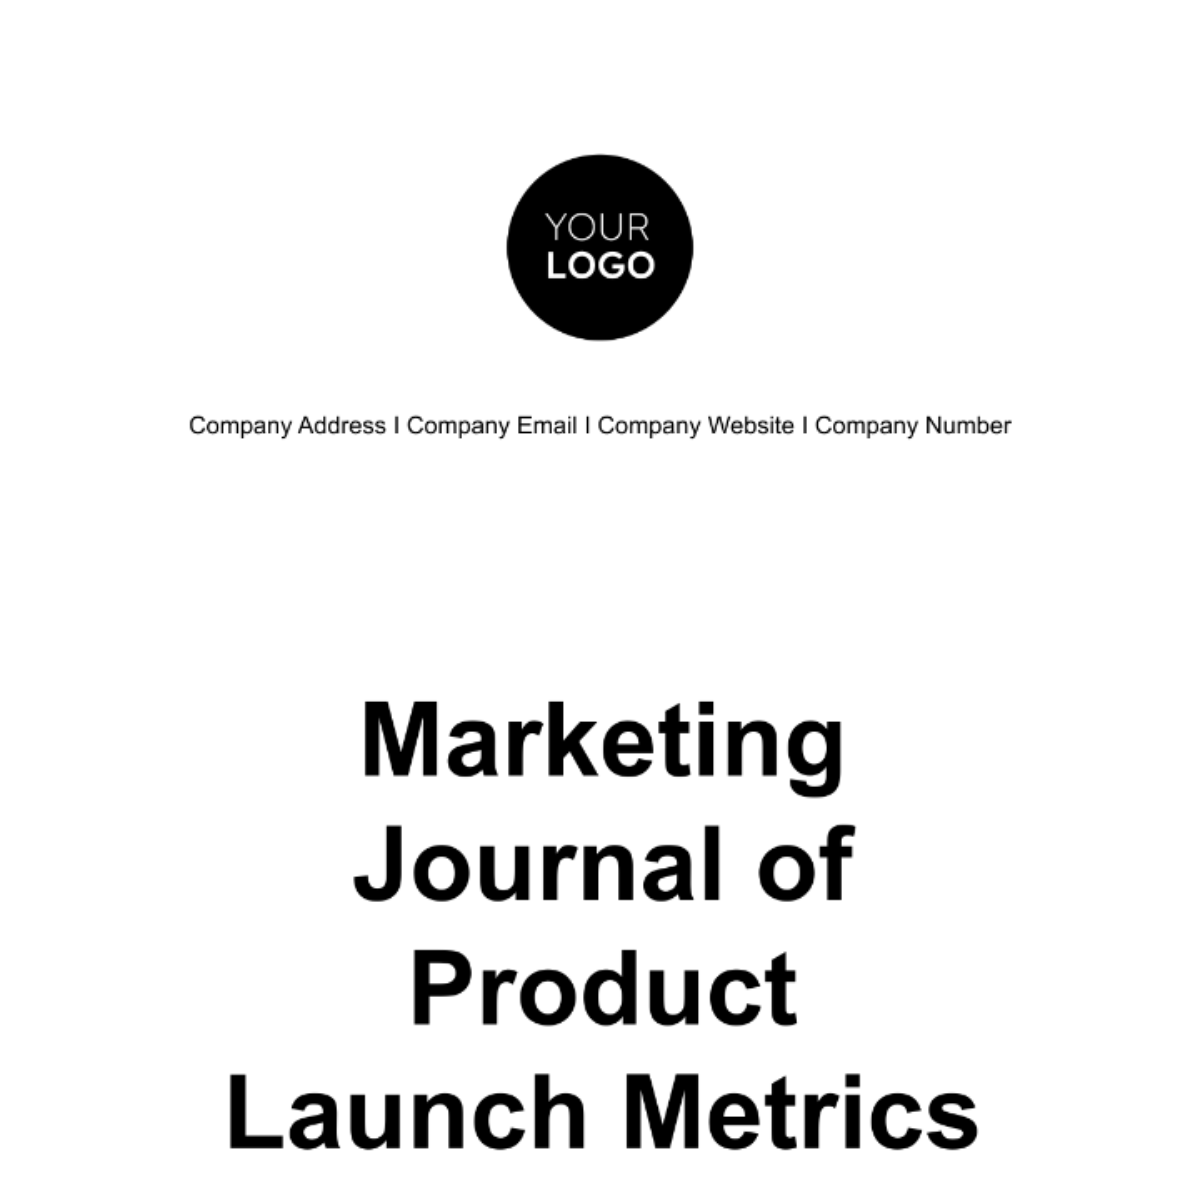 Marketing Journal of Product Launch Metrics Template